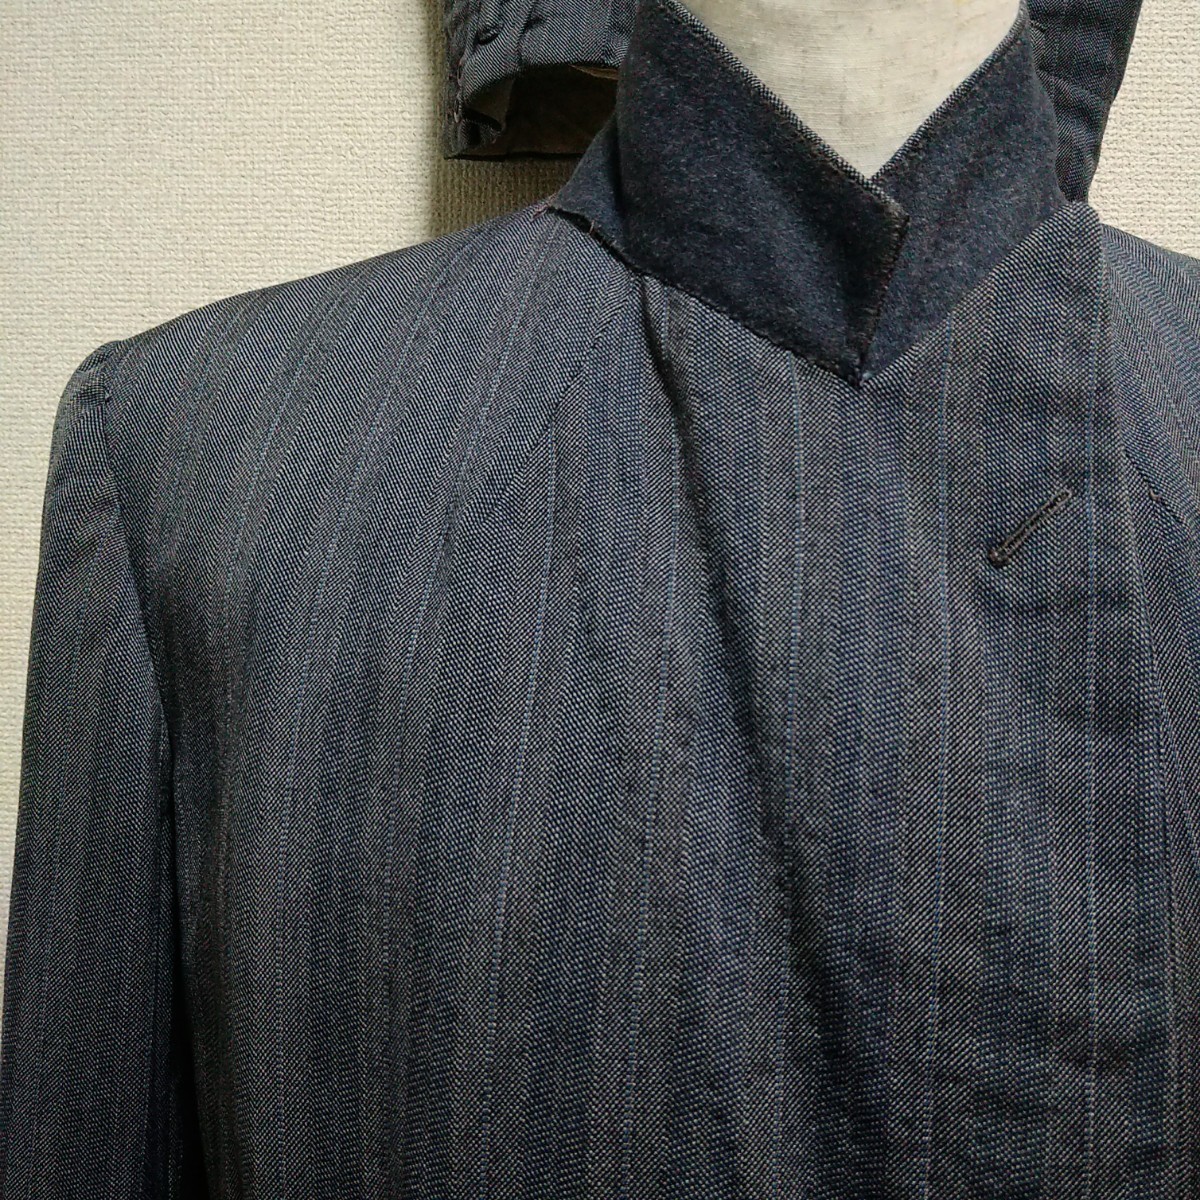 30s 40s US Vintage bi spoke double breast suit setup gray blue superior article US36/W30 degree Hollywood style 